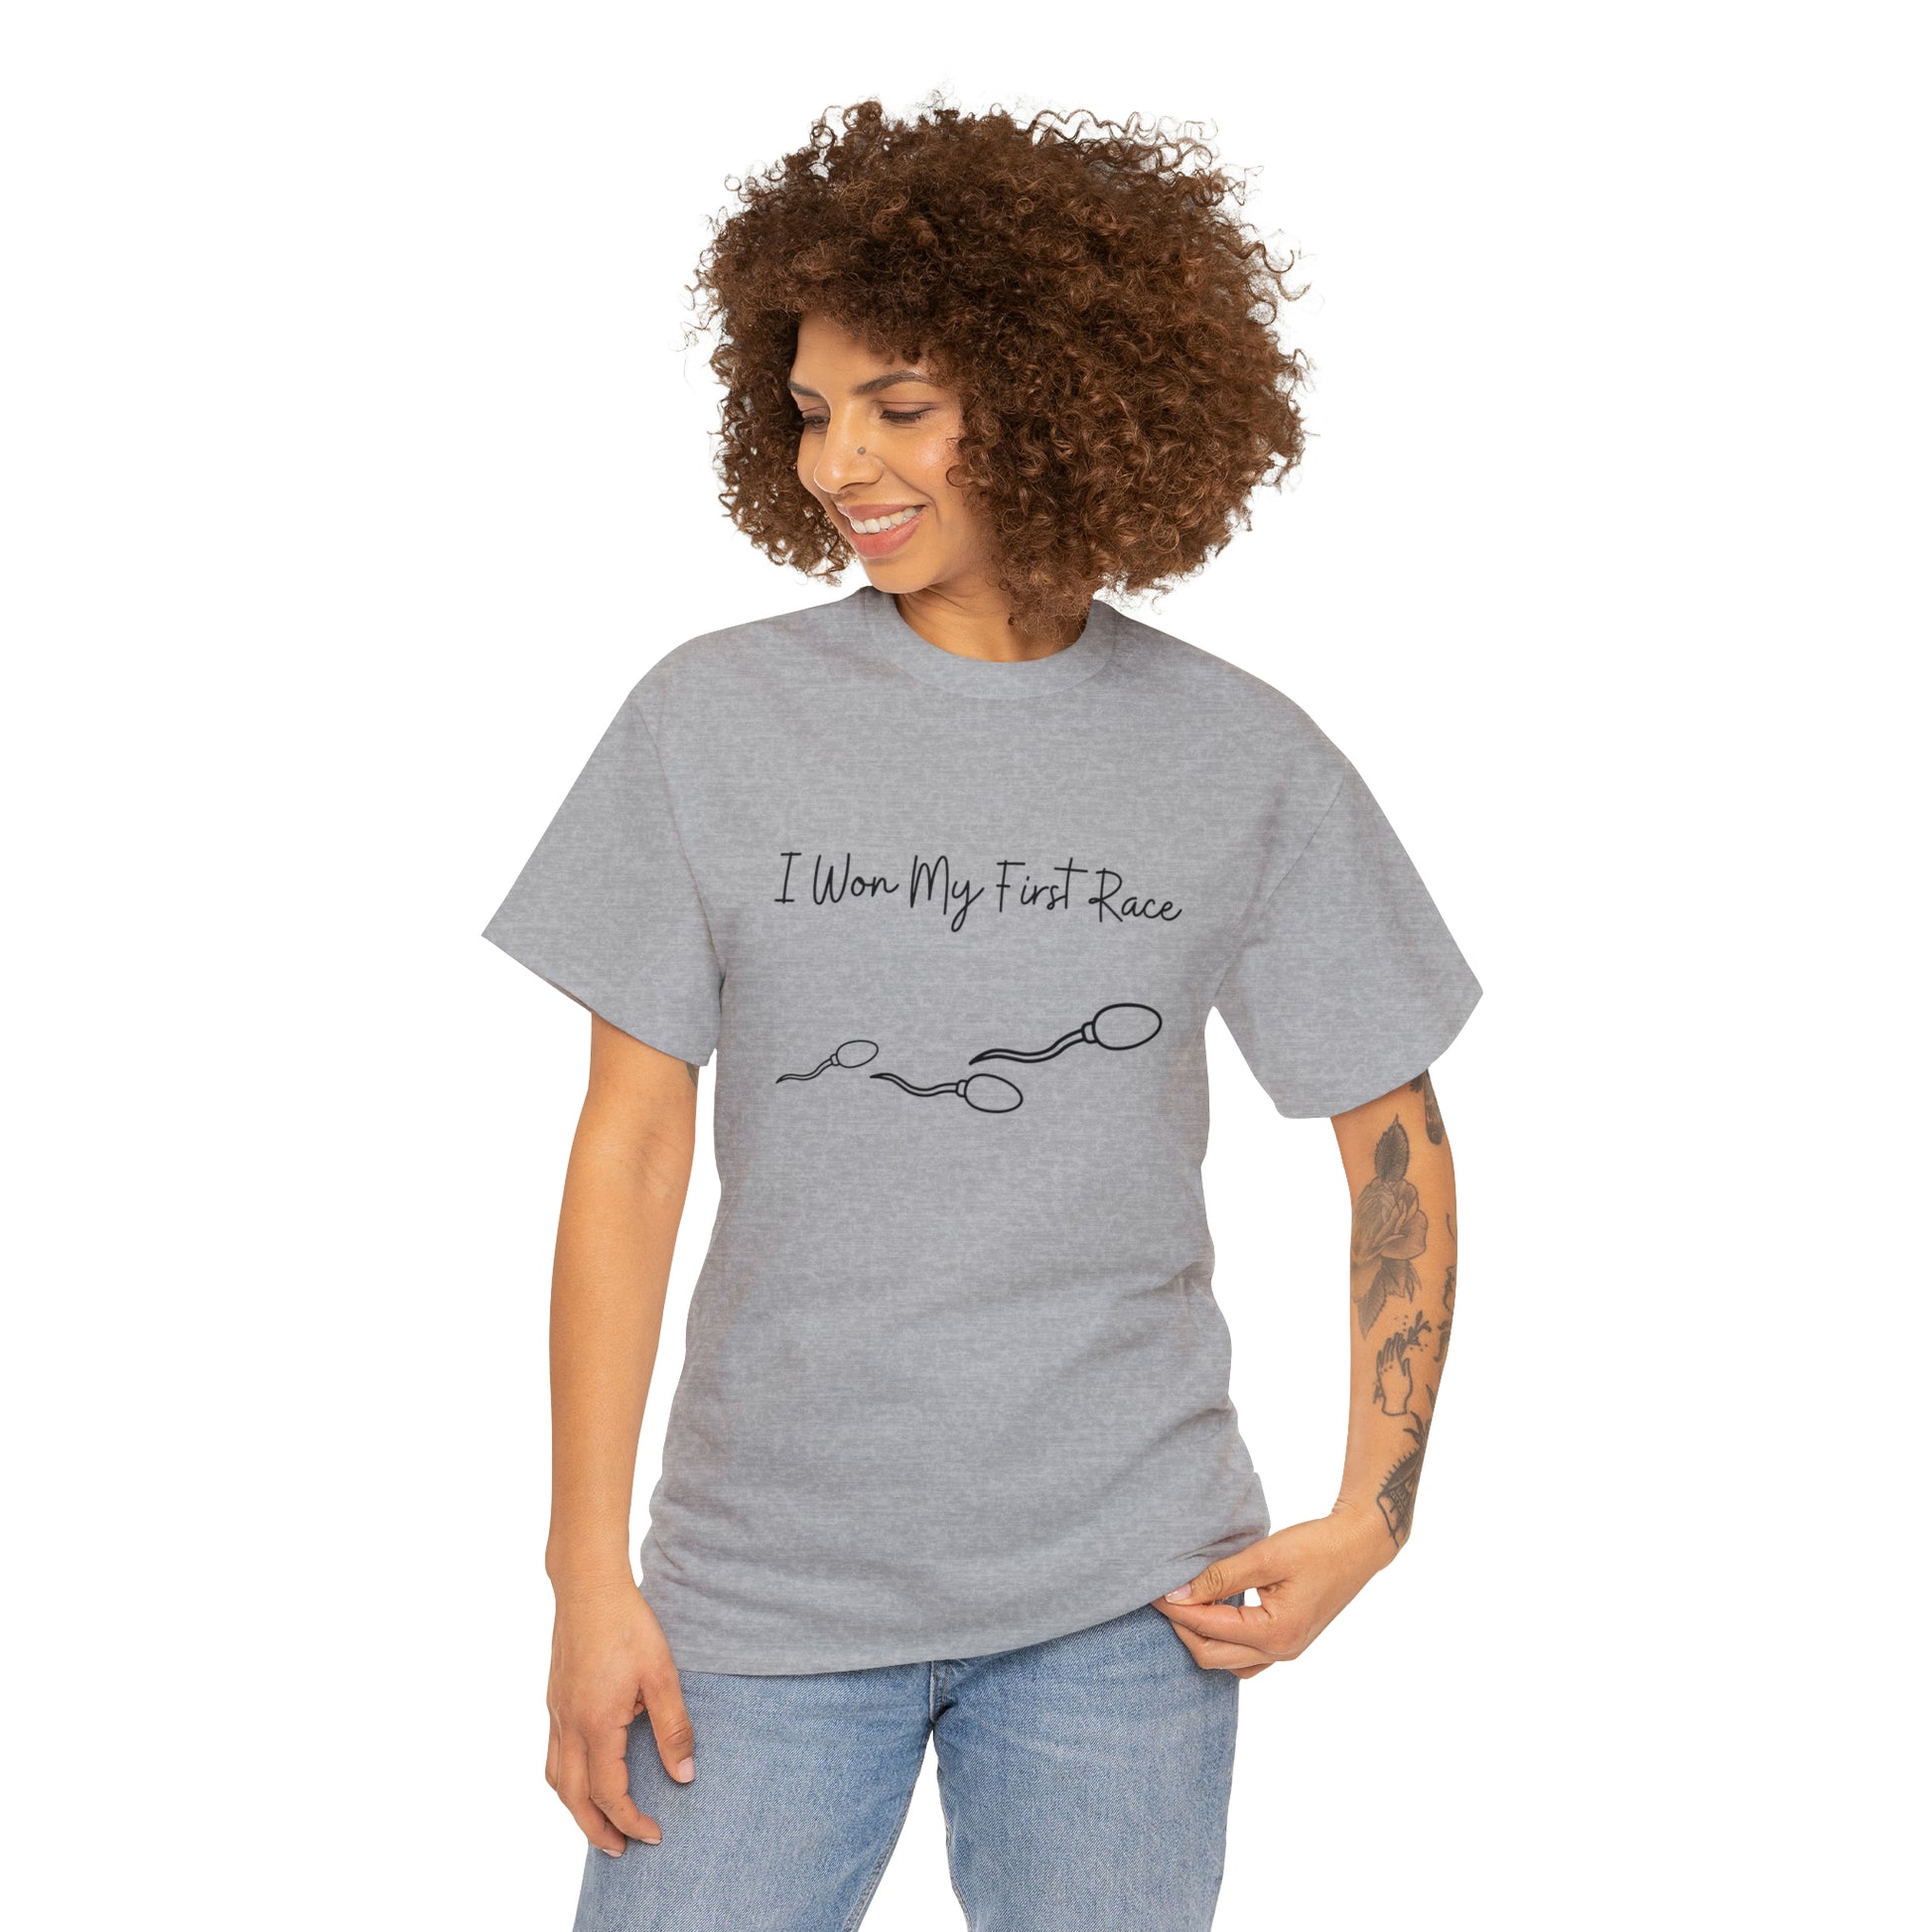 "I Won My First Race" Adult T-Shirt - Weave Got Gifts - Unique Gifts You Won’t Find Anywhere Else!